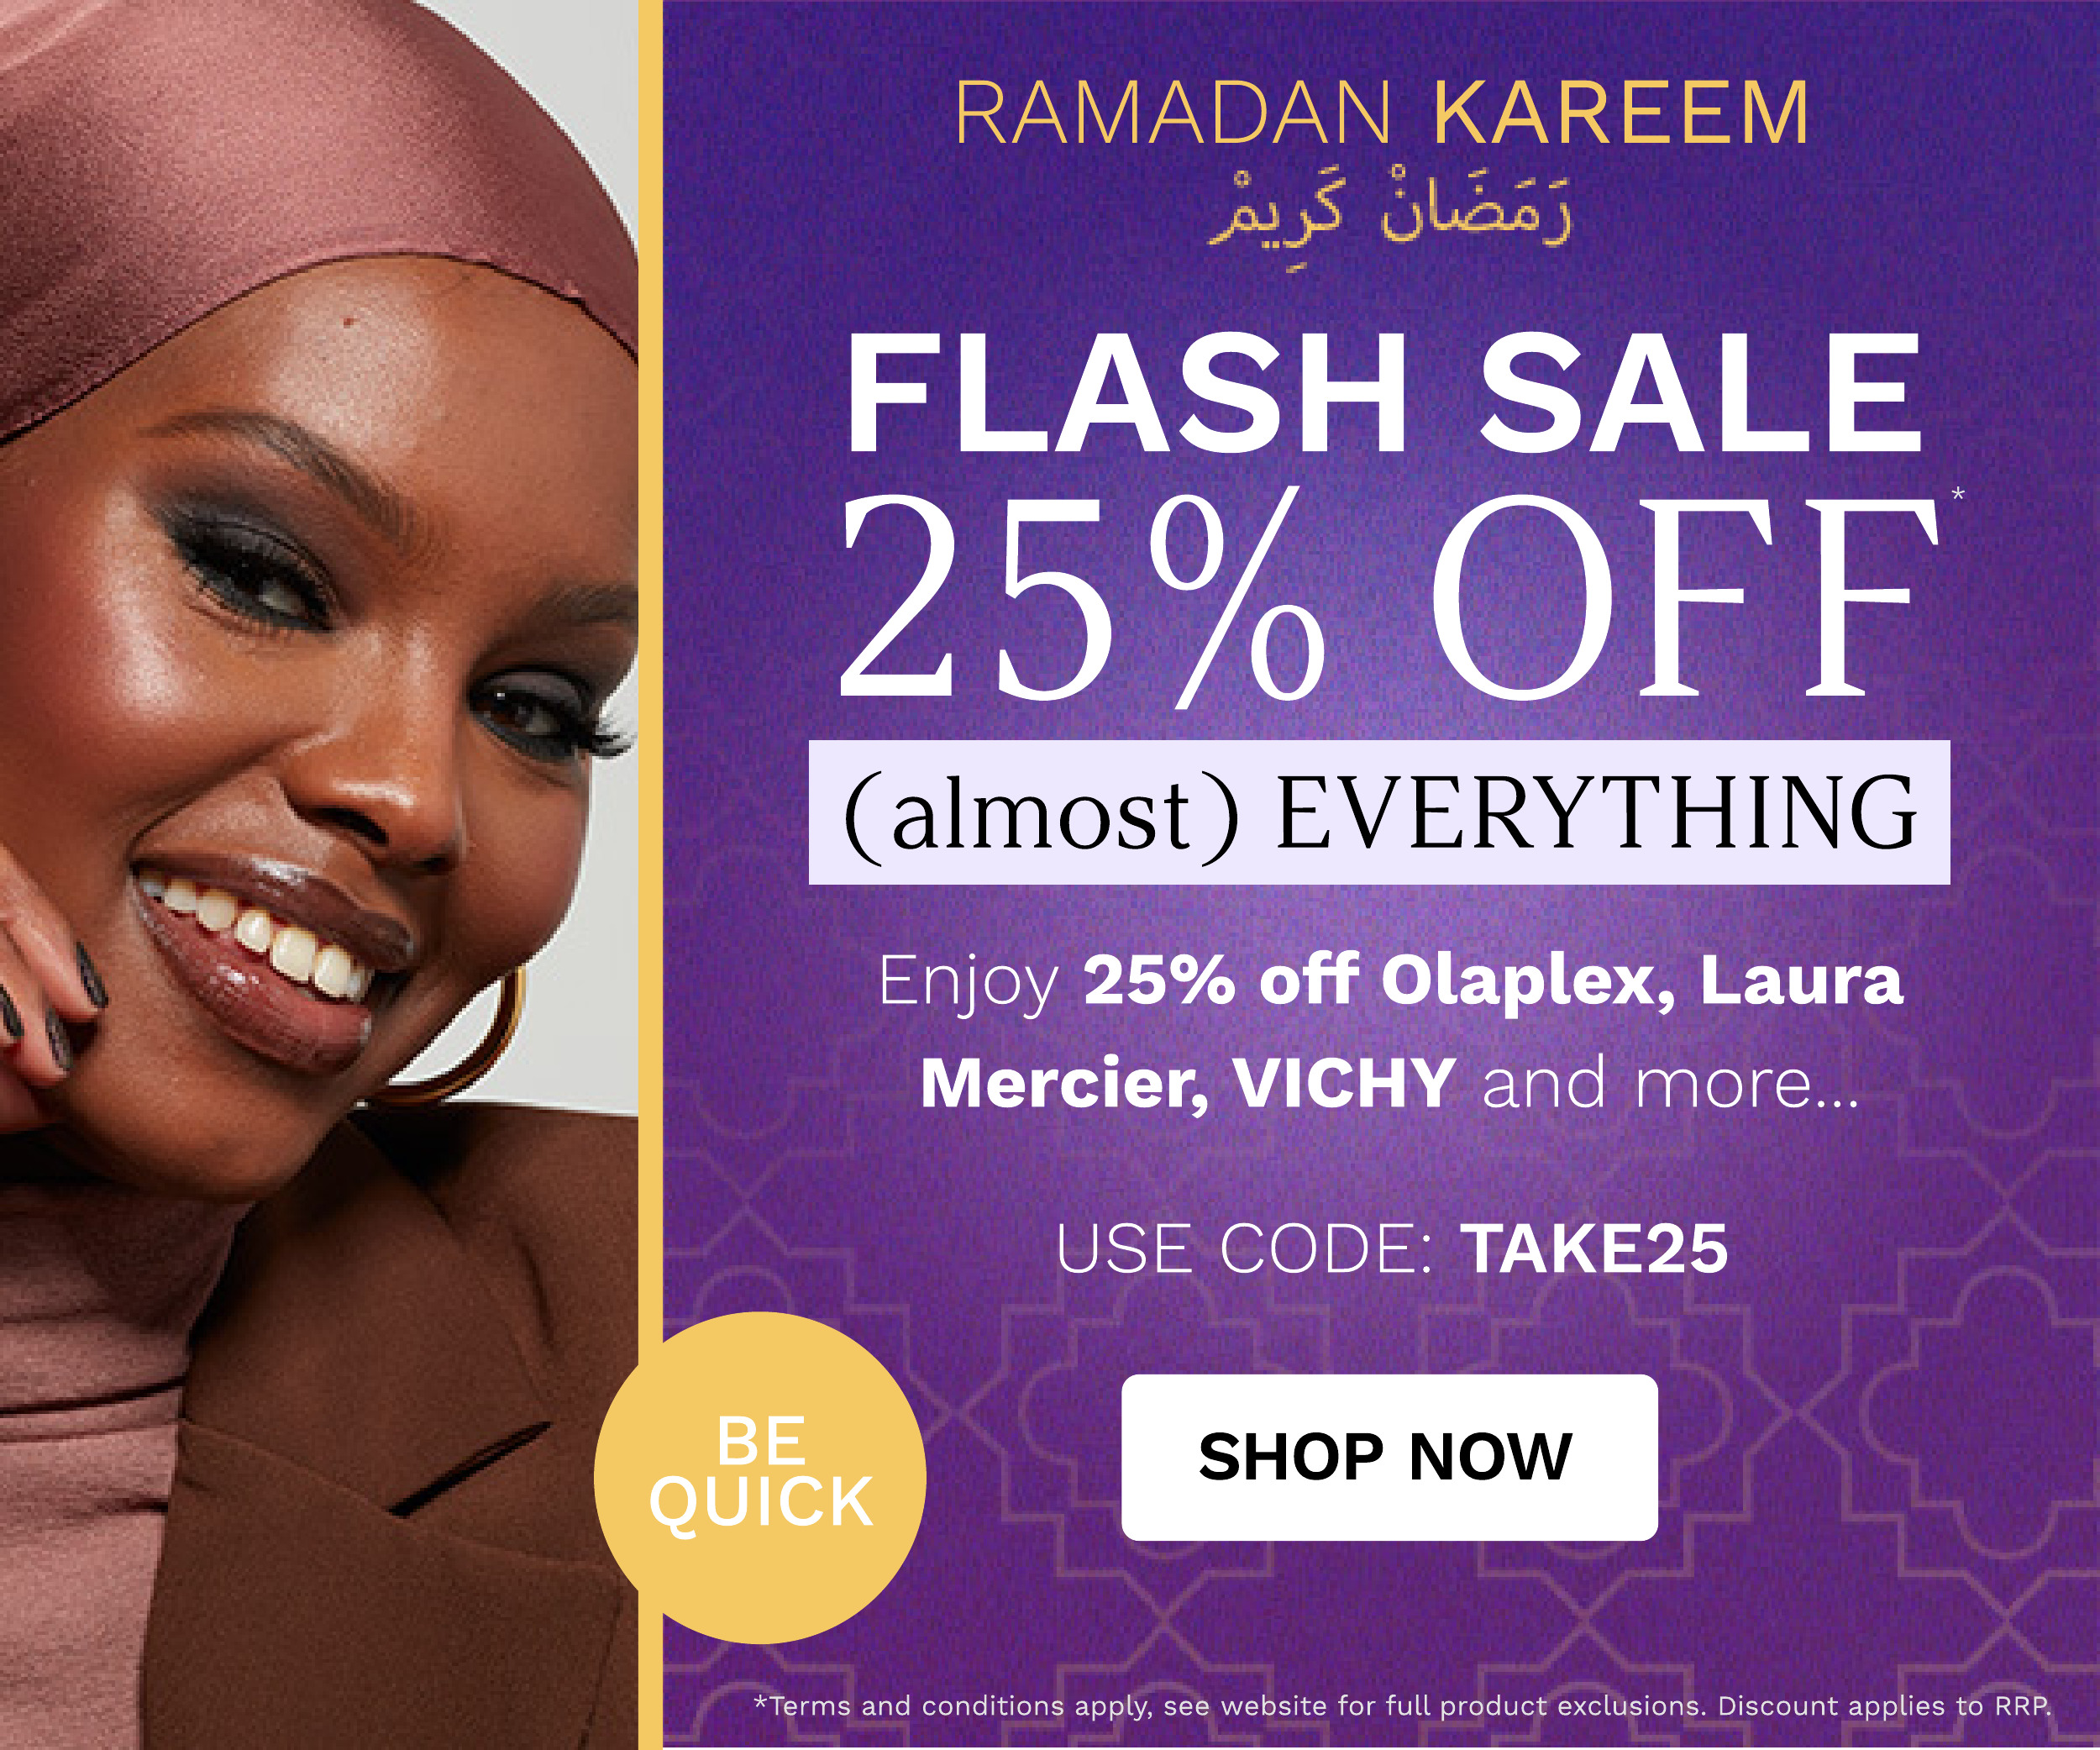  RAIIADAPIIFJ KAREEM 35S Ol FLASH SALE 25% TNy Enjoy 25% off Olaplex, Laura Mercier, VICHY and more.. USE CODE: TAKE25 SHOP NOW conditions apply, see website for full product exclusions. Discount applies to RRP. 